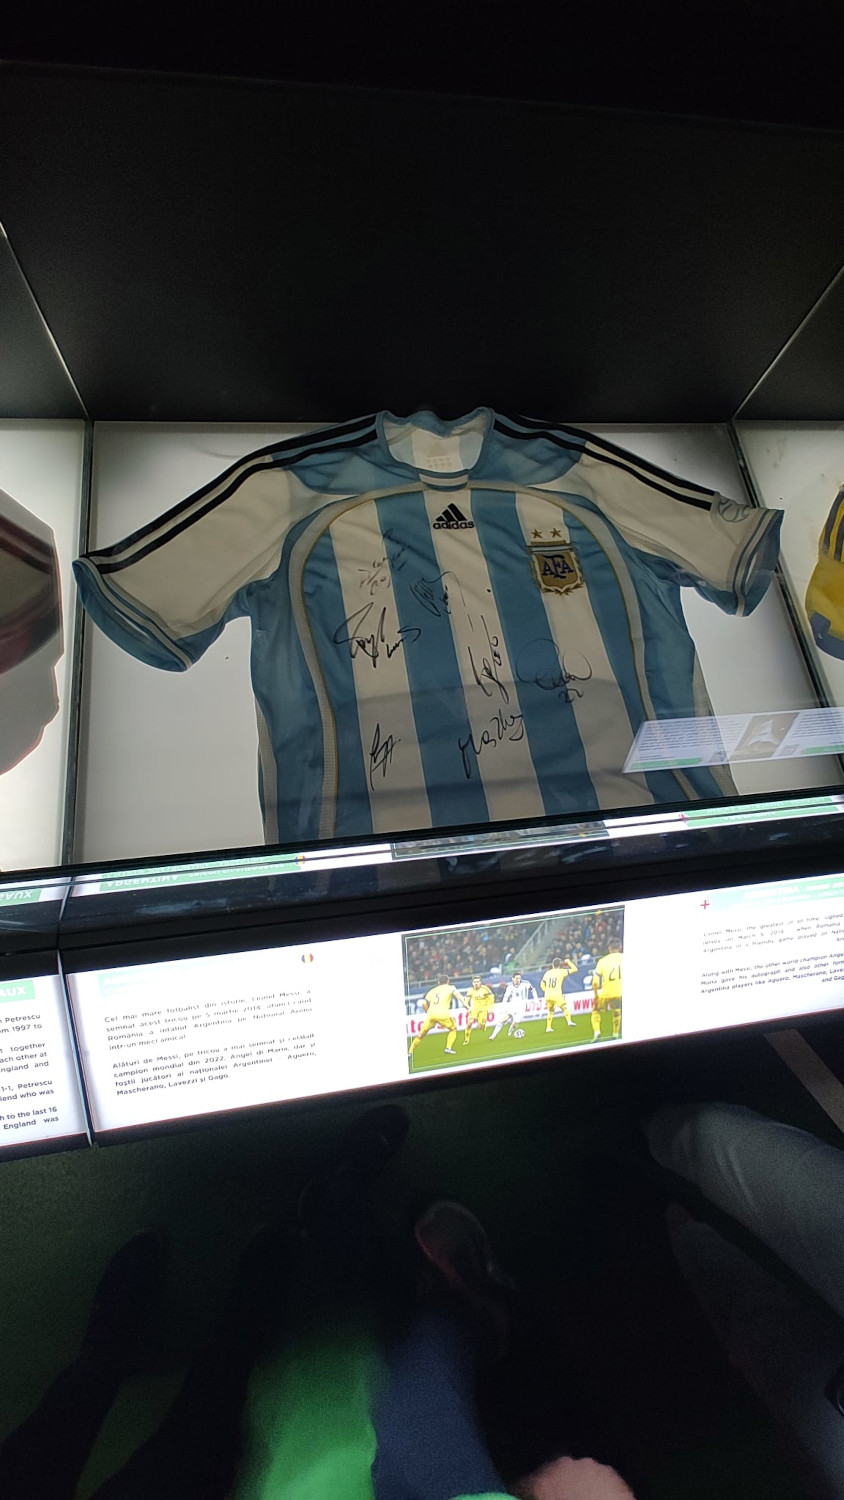 The shirt worn by Lionel Messi 